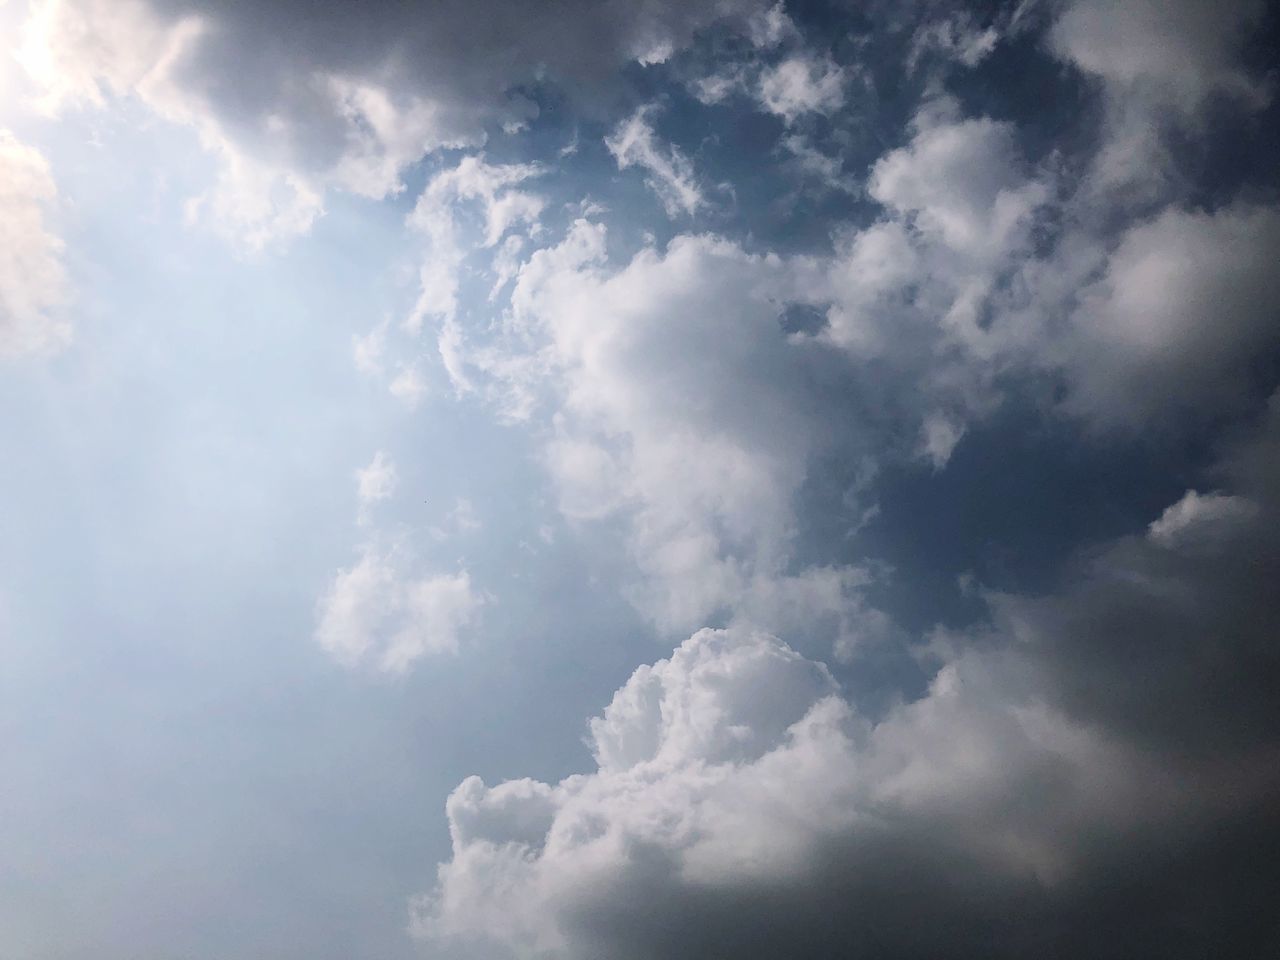 cloud - sky, nature, sky, beauty in nature, cloudscape, backgrounds, low angle view, tranquility, no people, scenics, sky only, full frame, outdoors, day